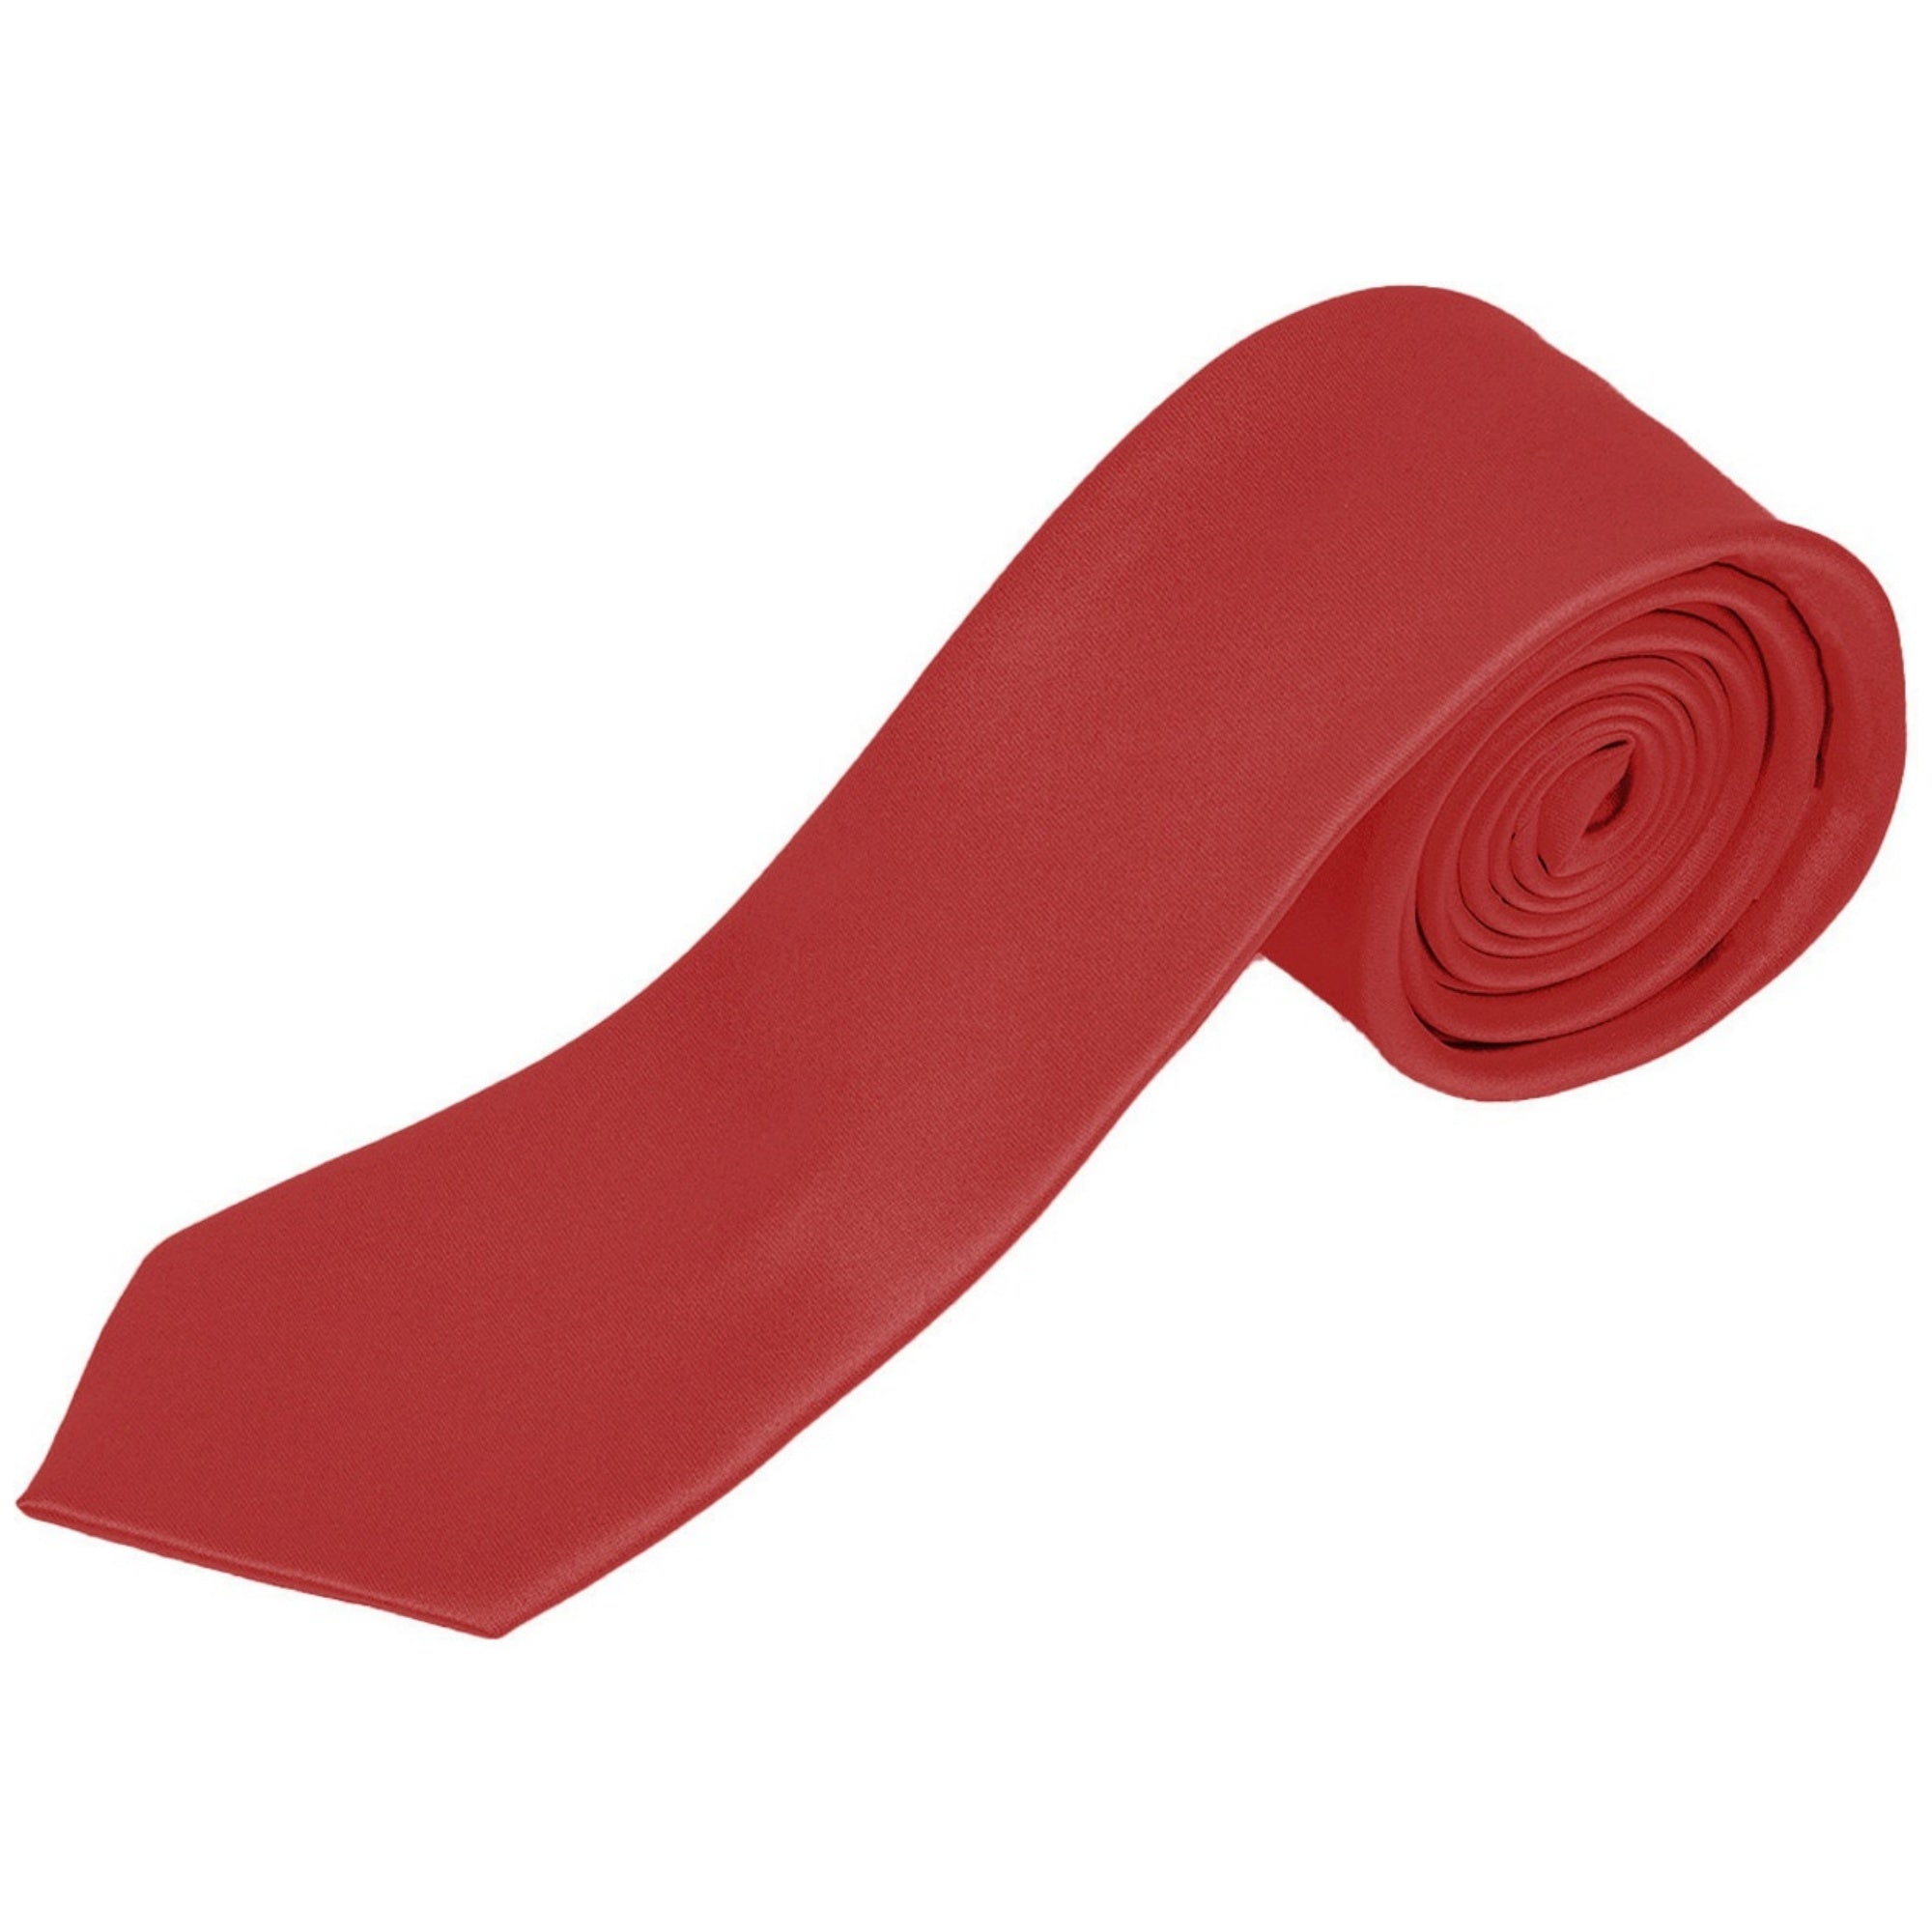 Men's Solid Color 2 Inch Wide And 57 Inch Long Slim Neckties Neck Tie TheDapperTie Red 57" long and 2" wide 